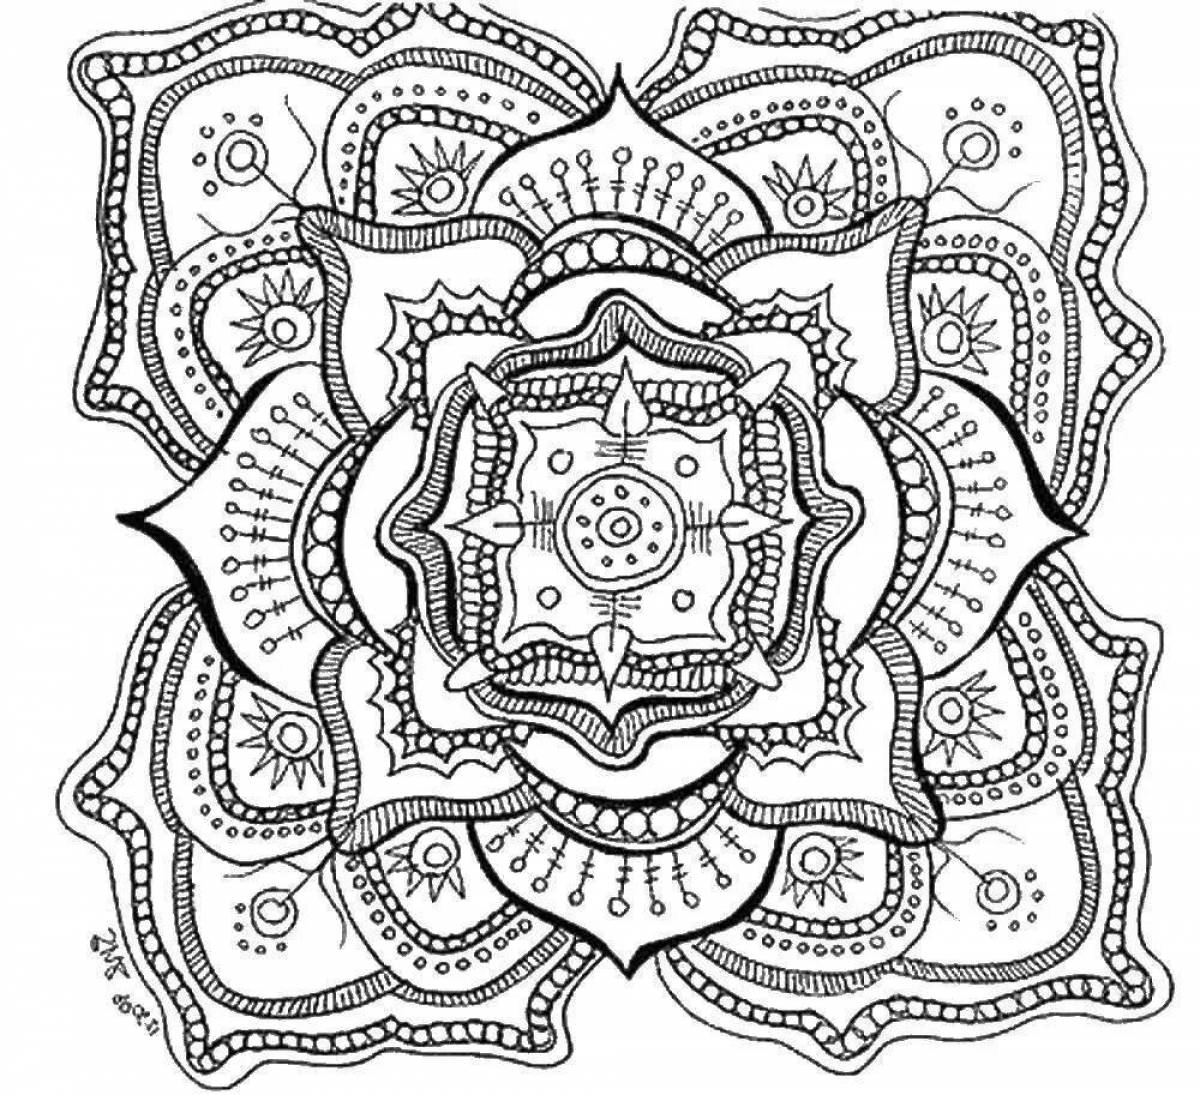 Animated logo coloring page